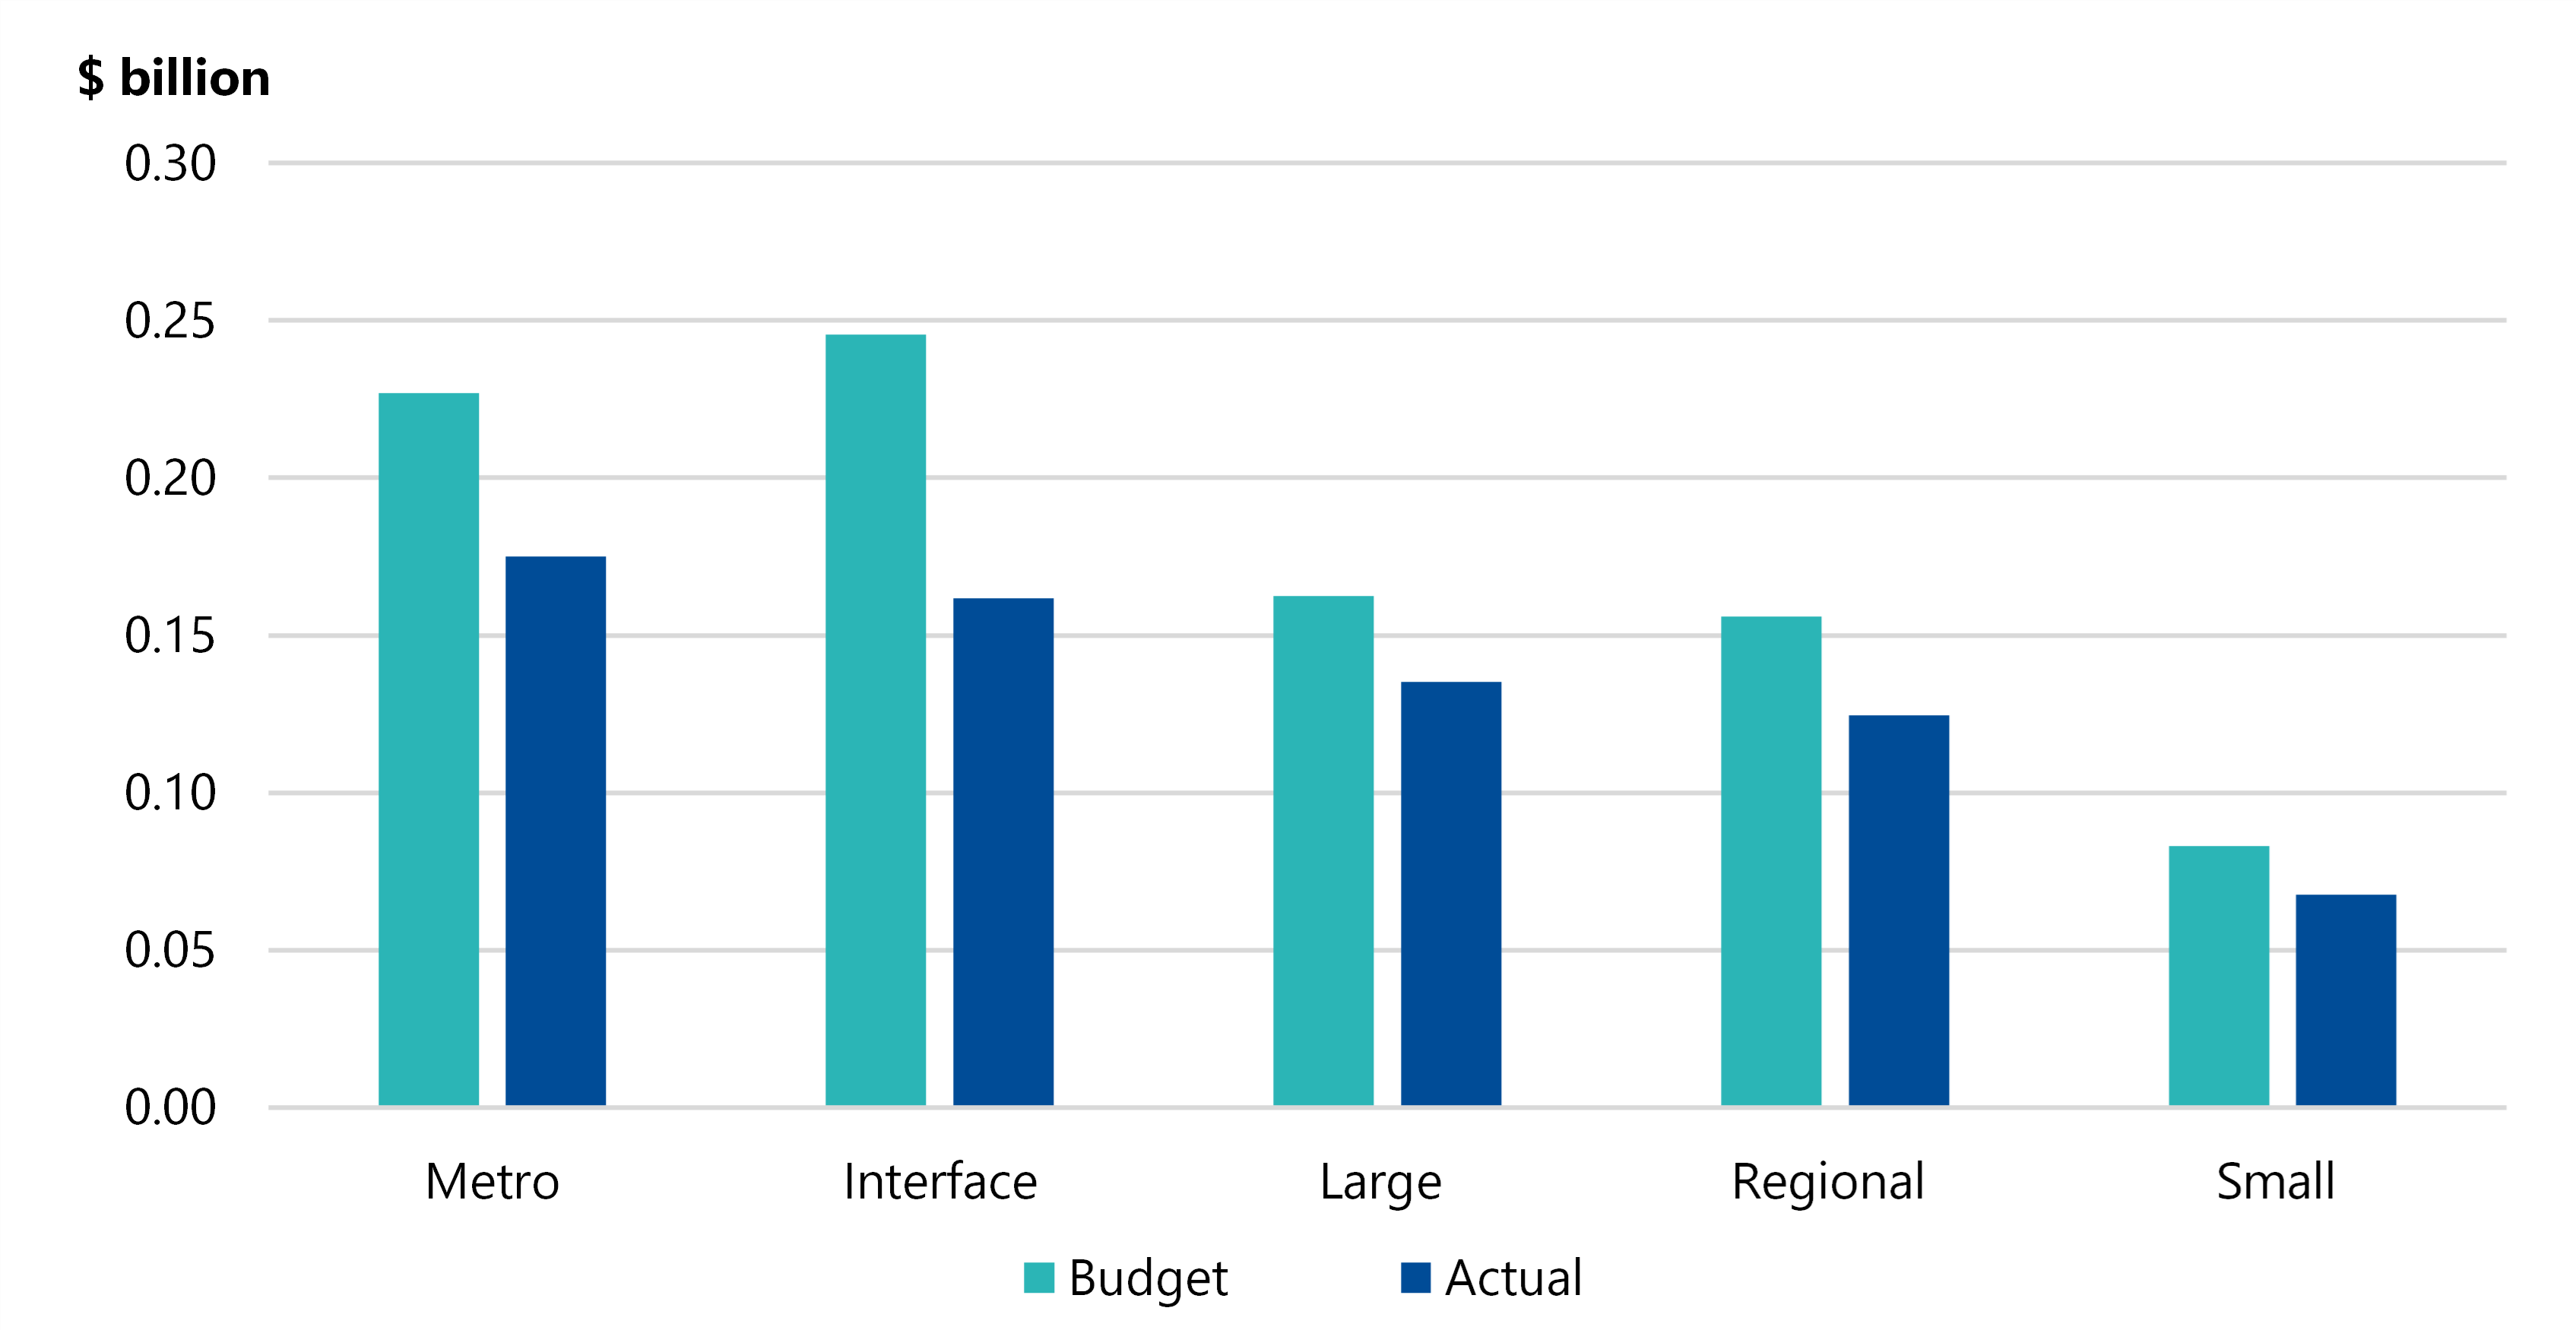 Figure 19 is a combo bar chart showing that, in 2022–23, budgeted roads expenditure for metro councils was $230 million but actual expenditure was $170 million. Budgeted expenditure for interface councils was $250 million and actual expenditure was $160 million. For large shire councils, budgeted expenditure was $160 million and actual expenditure was $140 million. For regional councils the amounts were $160 million and $120 million, while for small shire councils they were $80 milllion and $70 million.